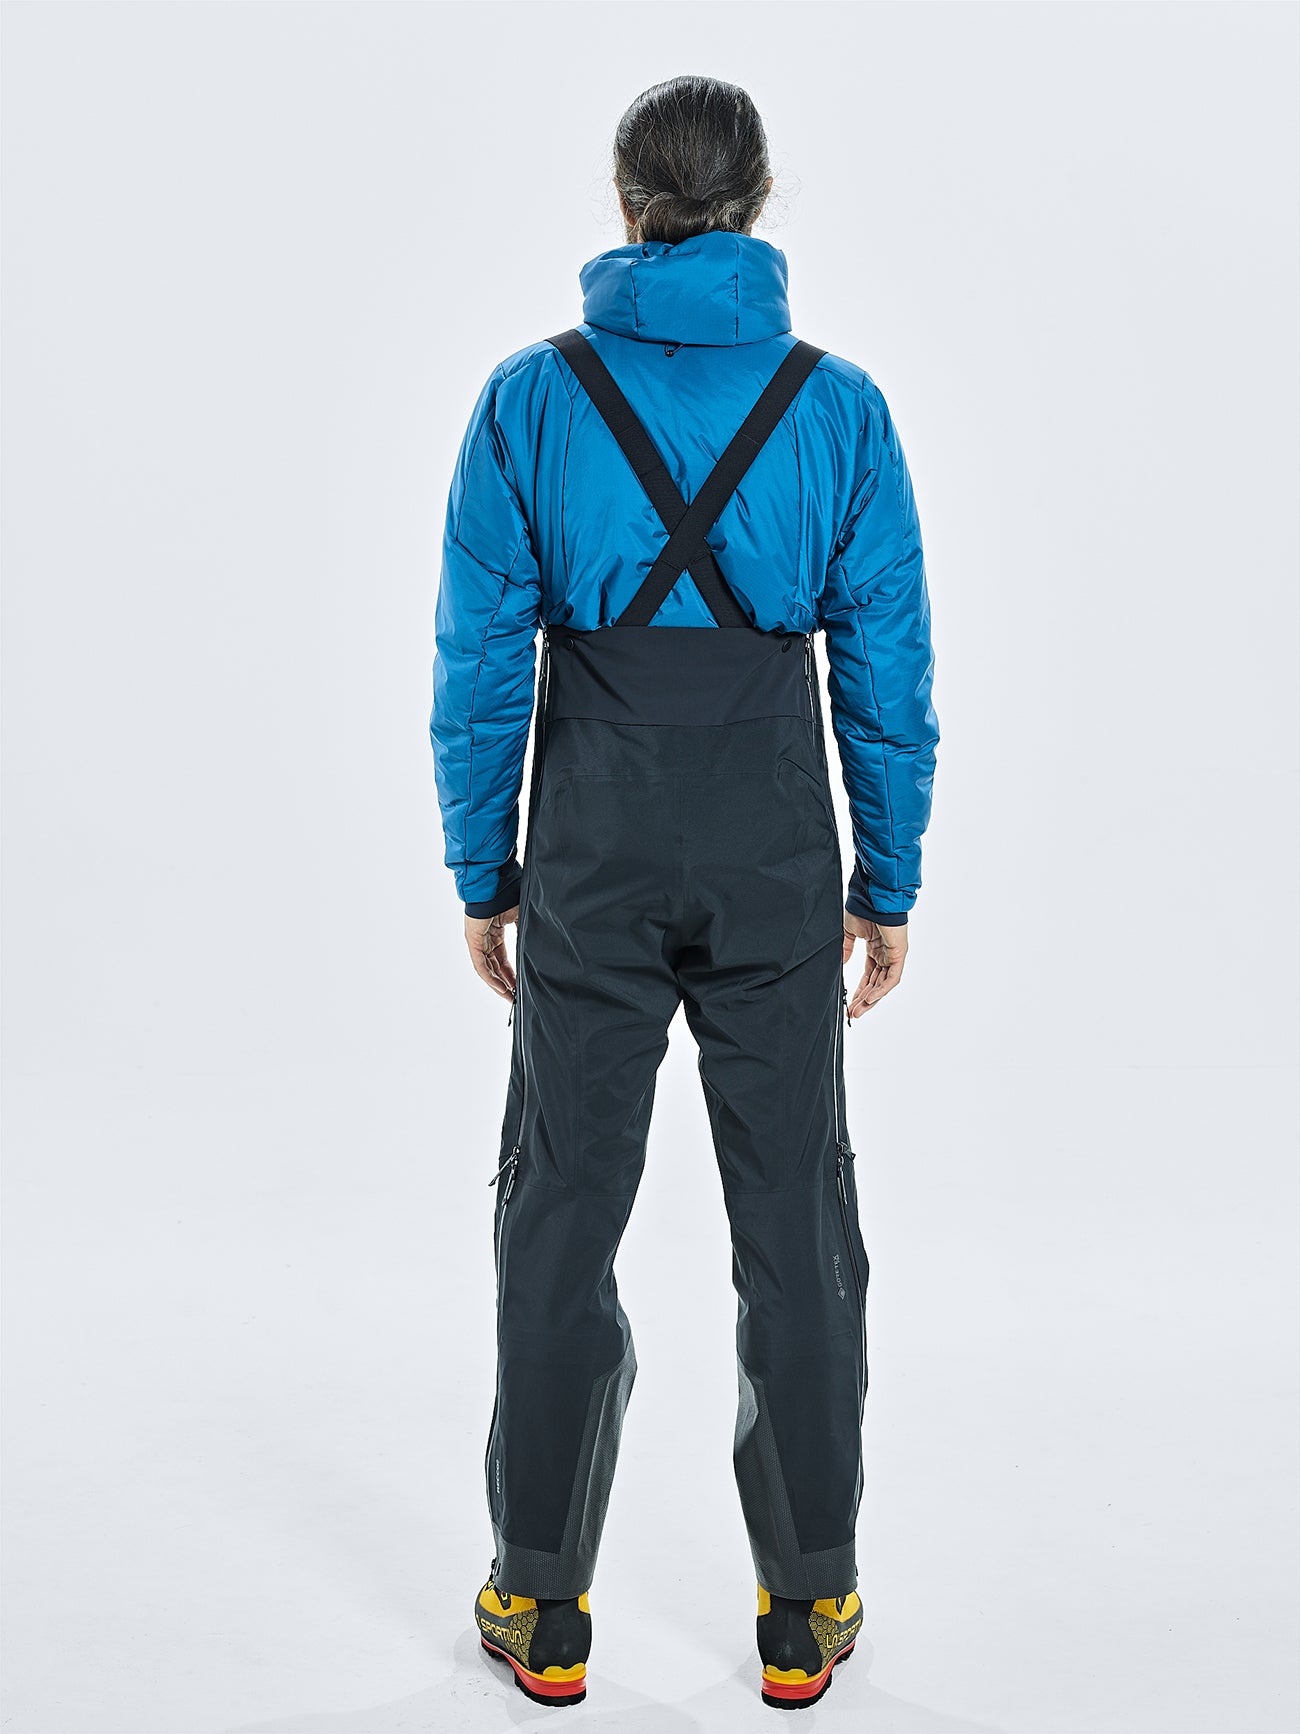 Yak Chinook Dry Trousers for Kayaking